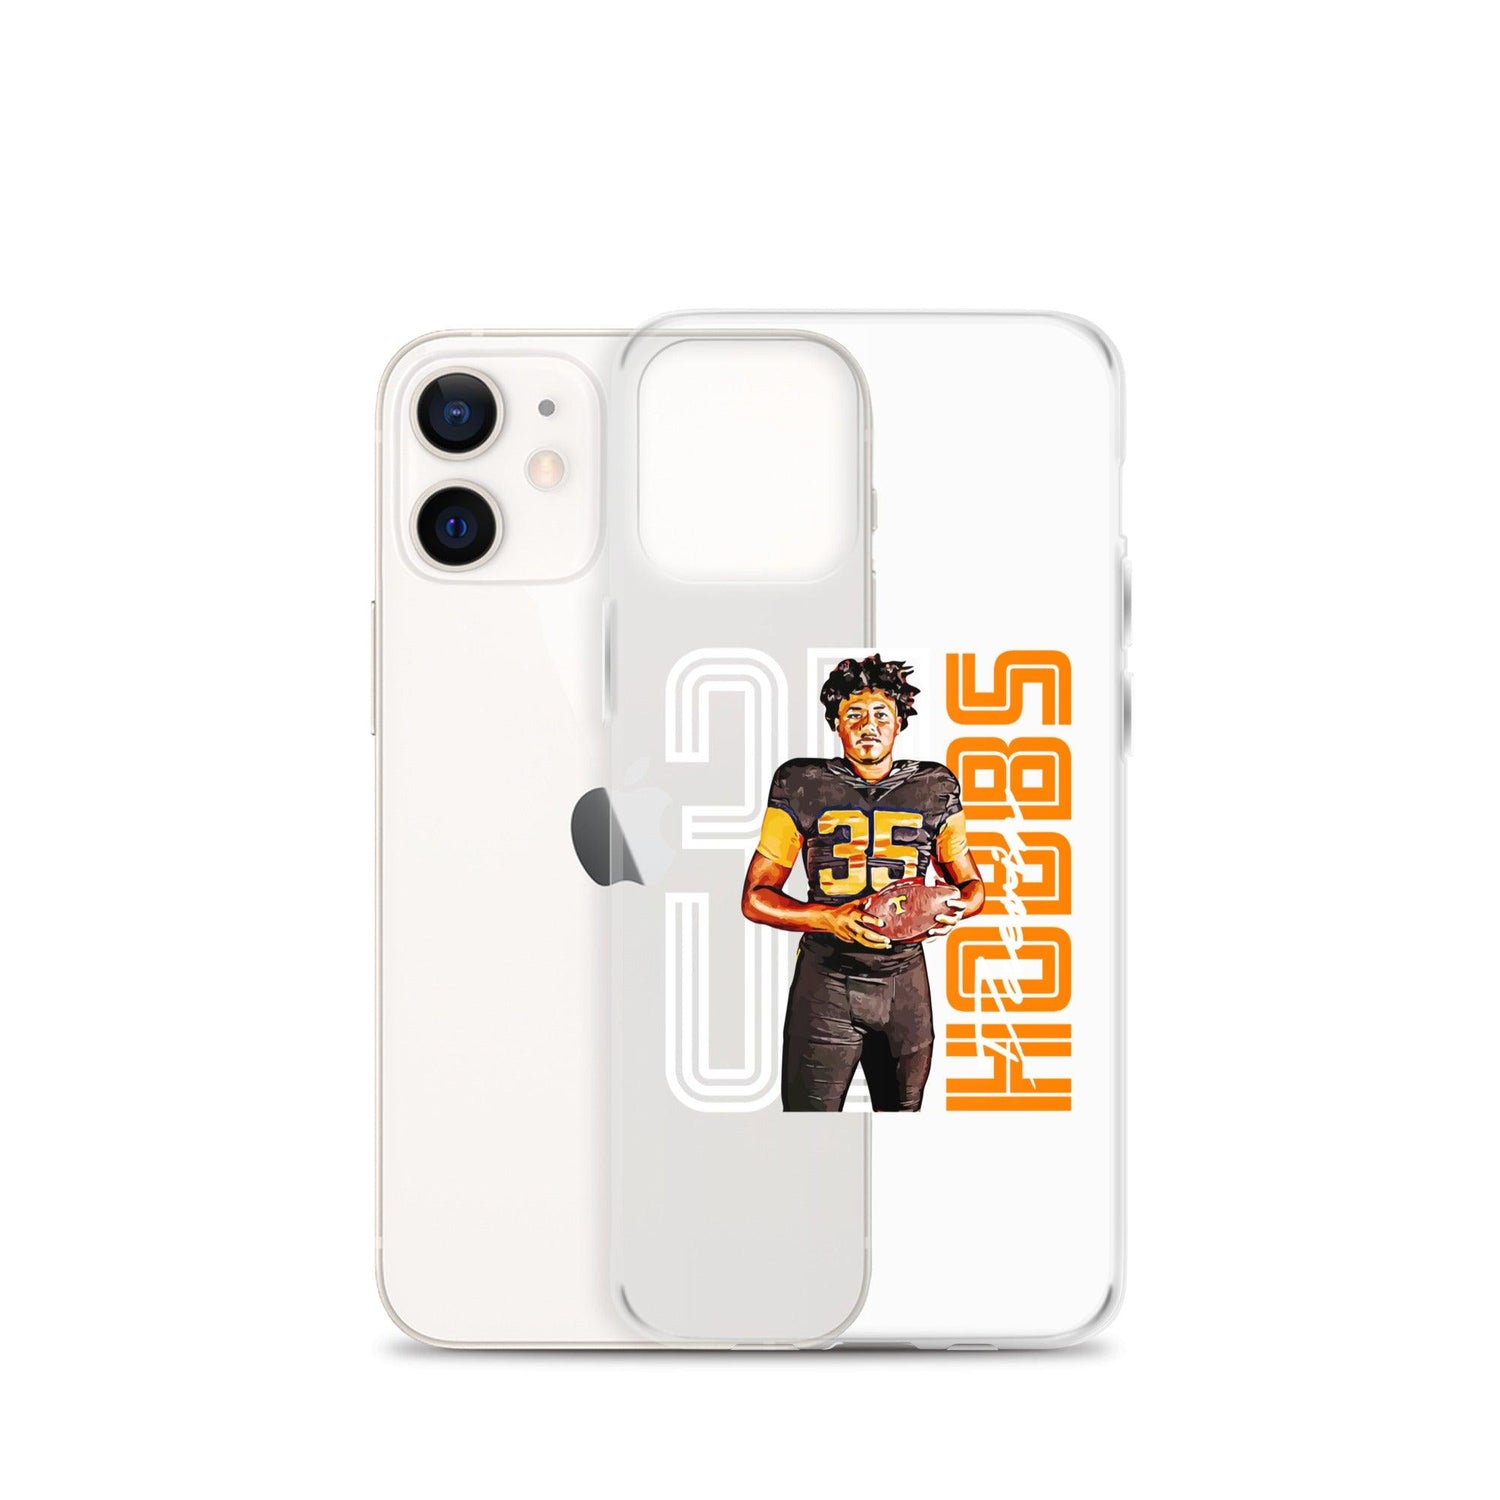 Daevin Hobbs "Gameday" iPhone Case - Fan Arch